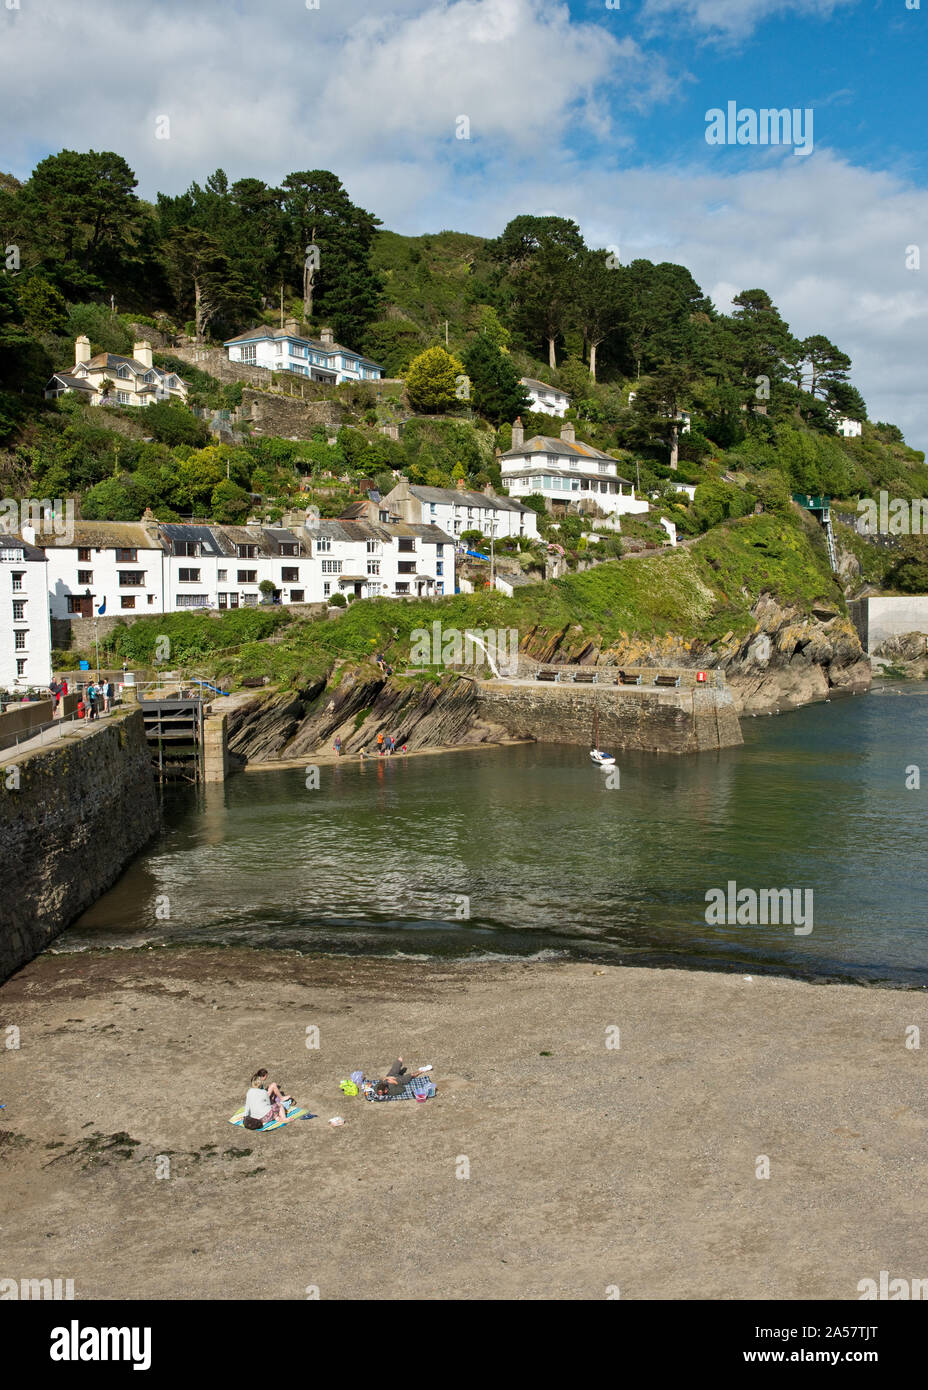 Entrance to Polperro Harbour, South Cornwall, England, UK Stock Photo